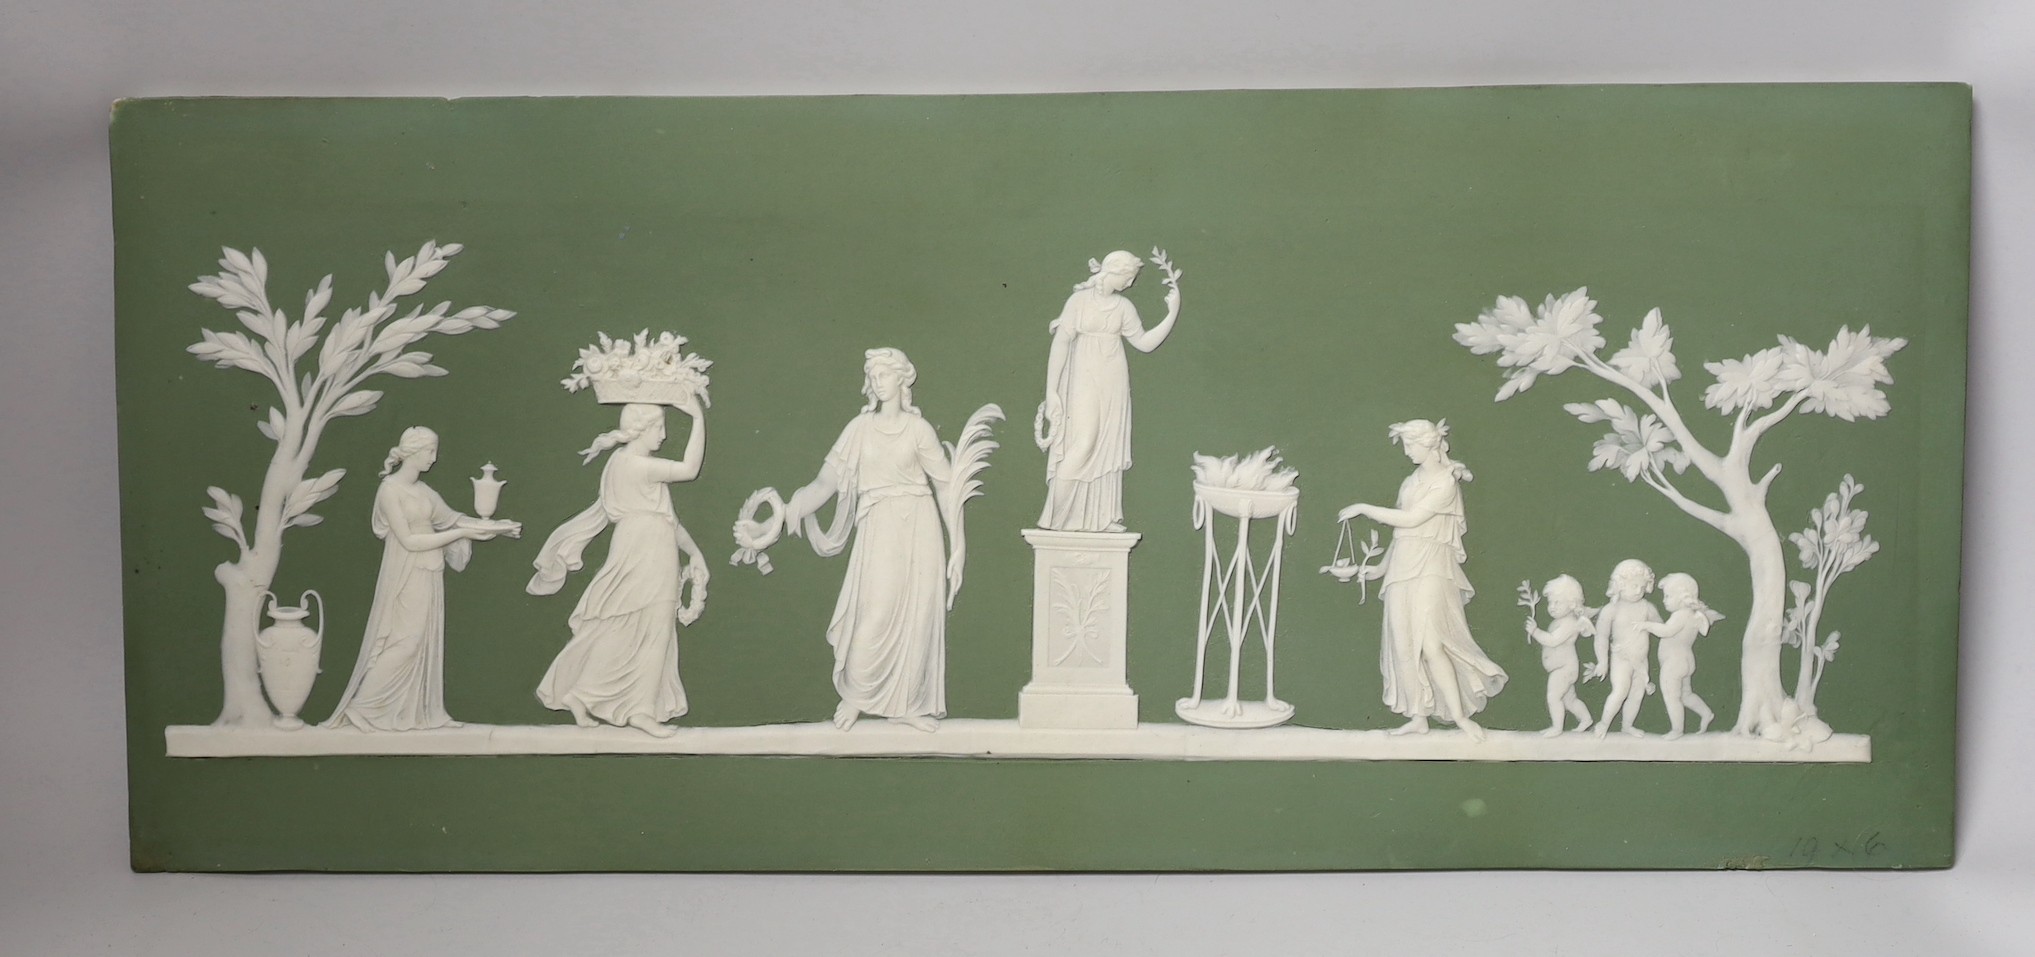 A large early 19th century Wedgwood green jasper plaque with classical reliefs, impressed mark Wedgwood A, 21 x 50cm